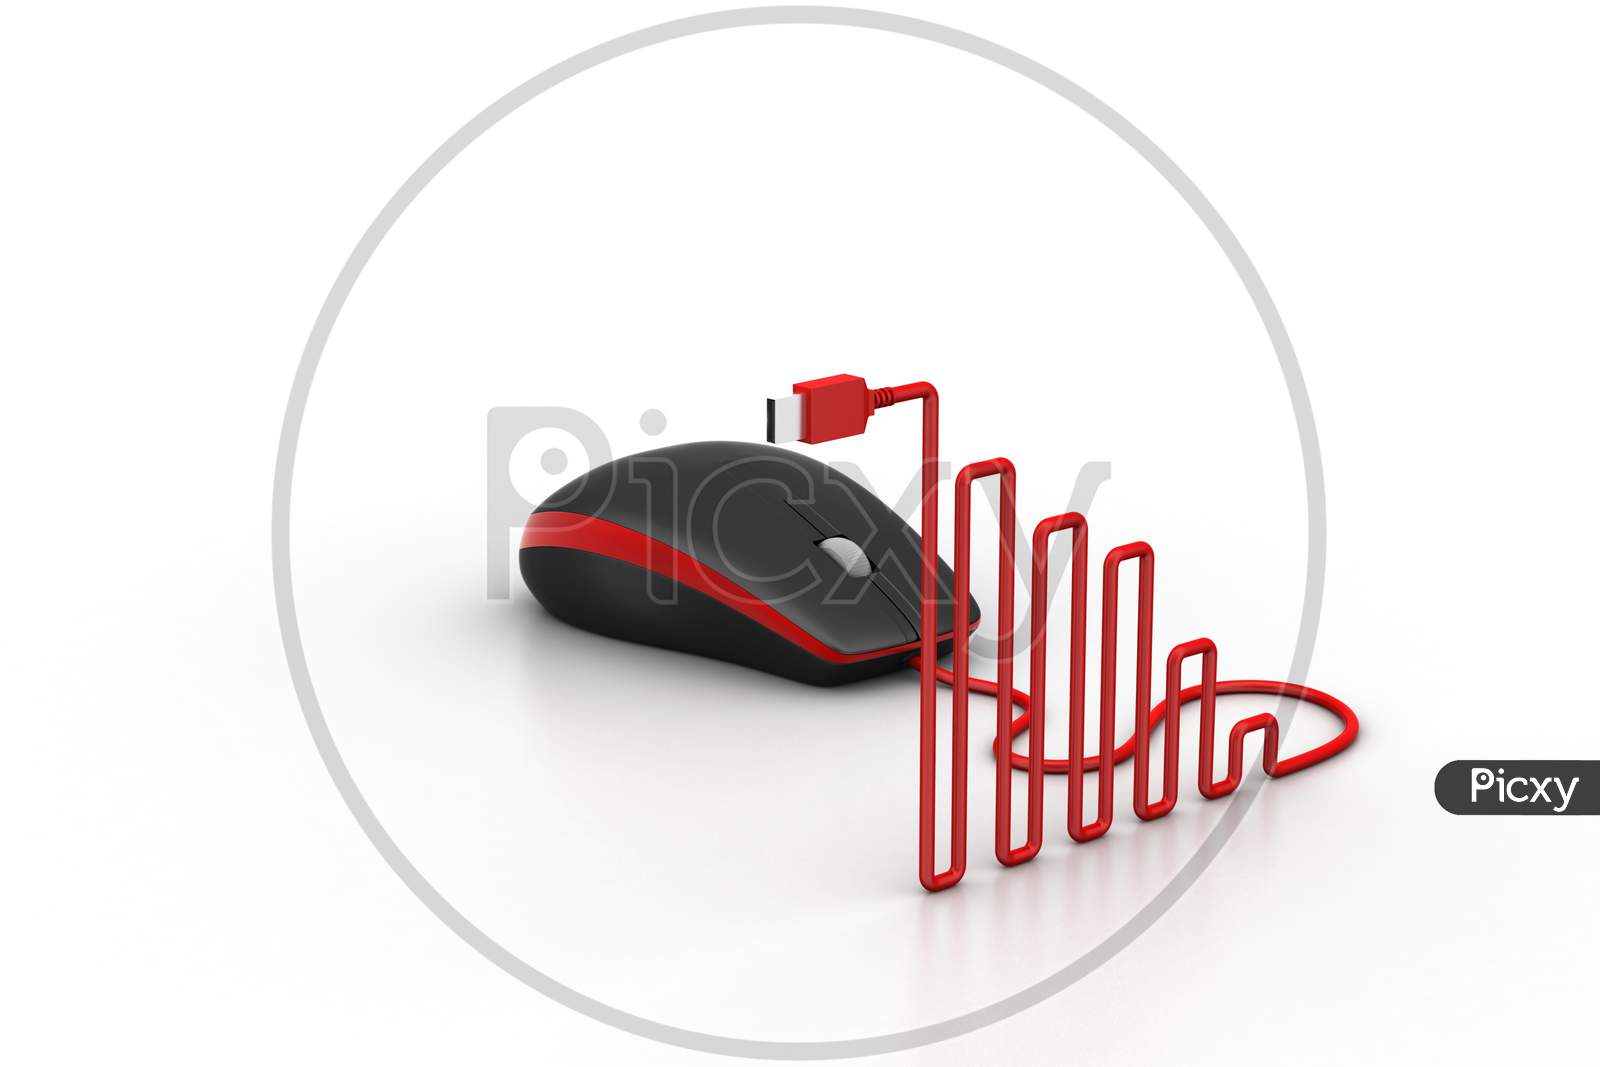 Computer Mouse With Cable Shaped Like A Graph